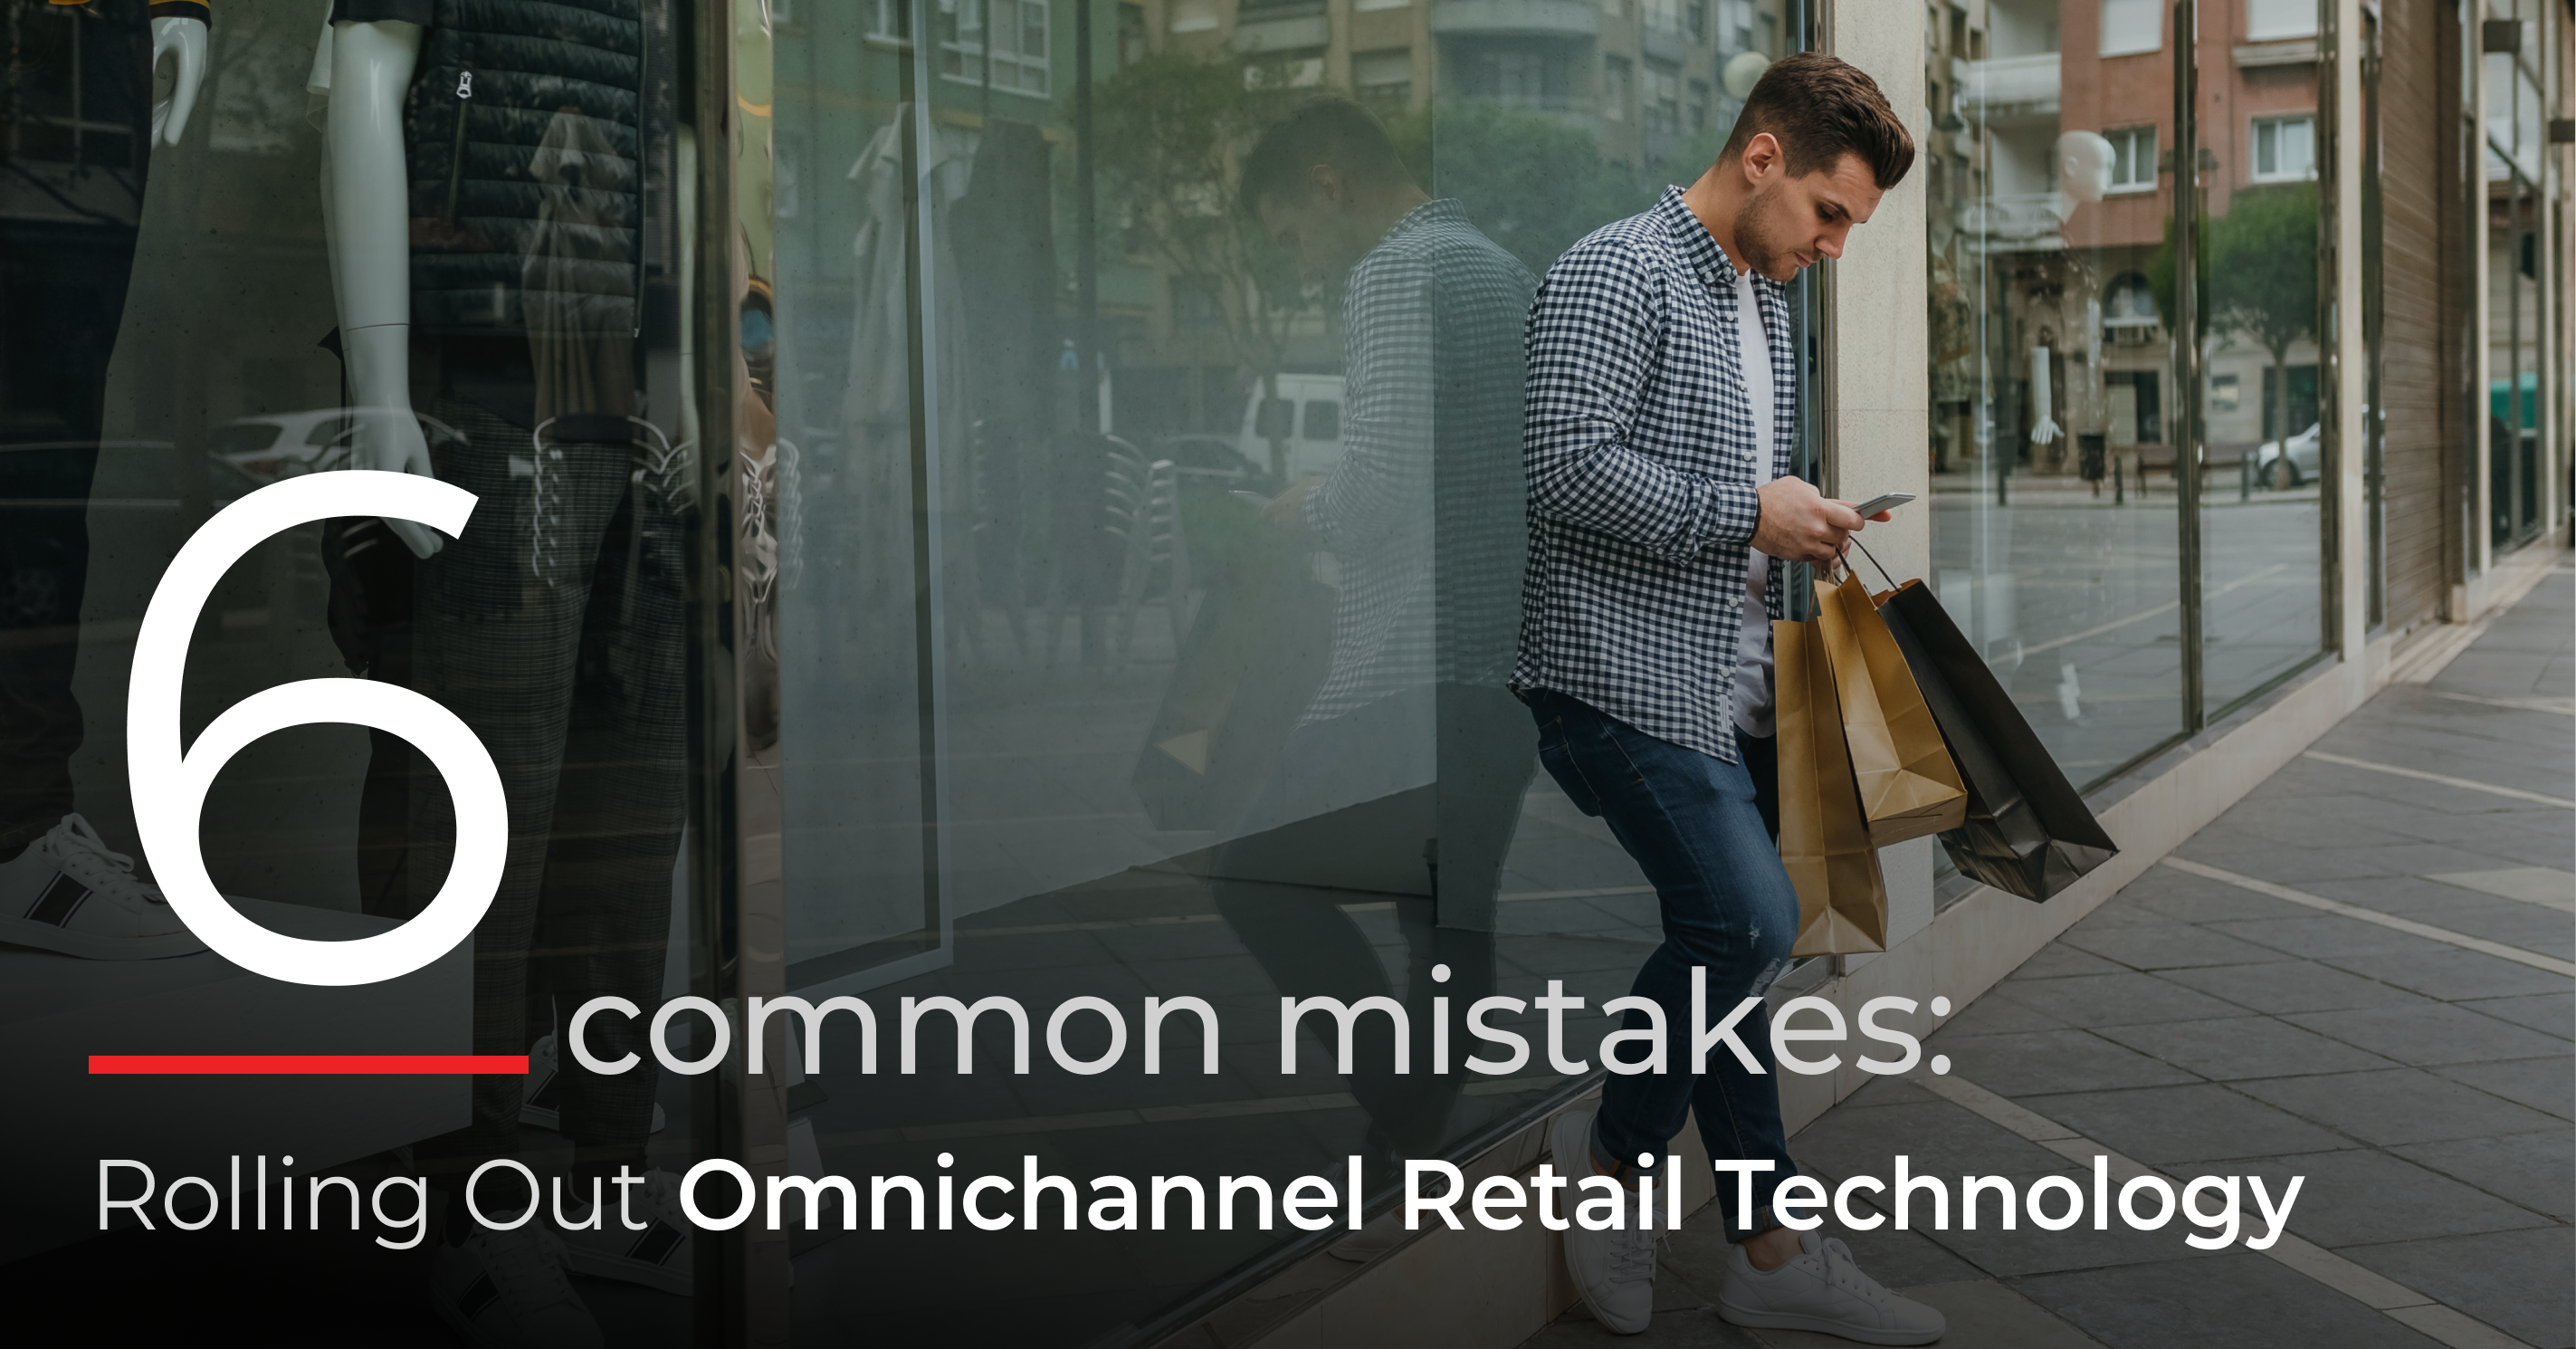 6 Common Mistakes_ Rolling Out Retail Omnichannel Technology